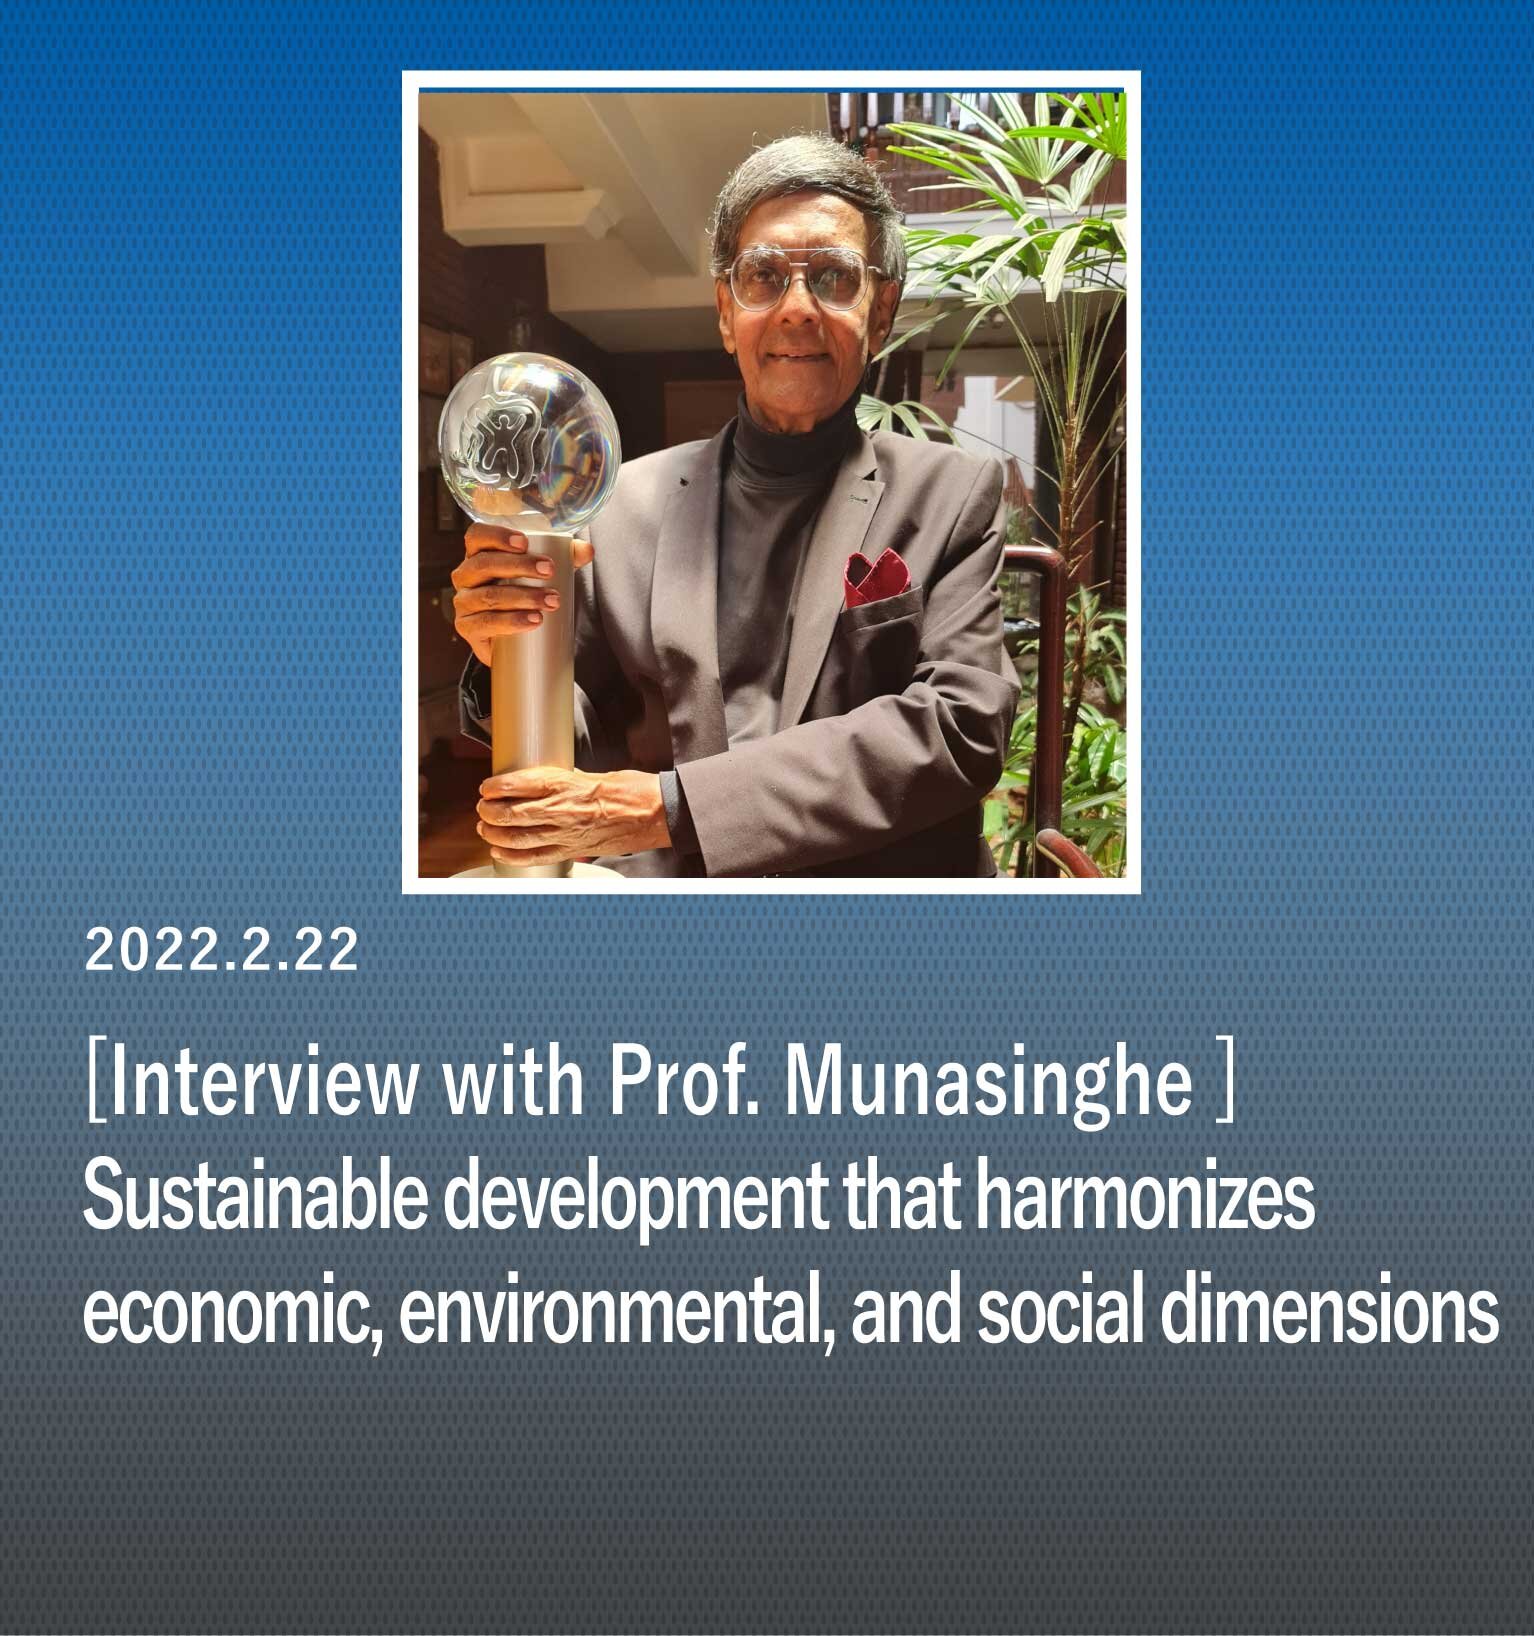 "Sustainable development that harmonizes economic, environmental, and social dimensions" Interview with Prof. Munasinghe, Winner of the 2021 Blue Planet Prize